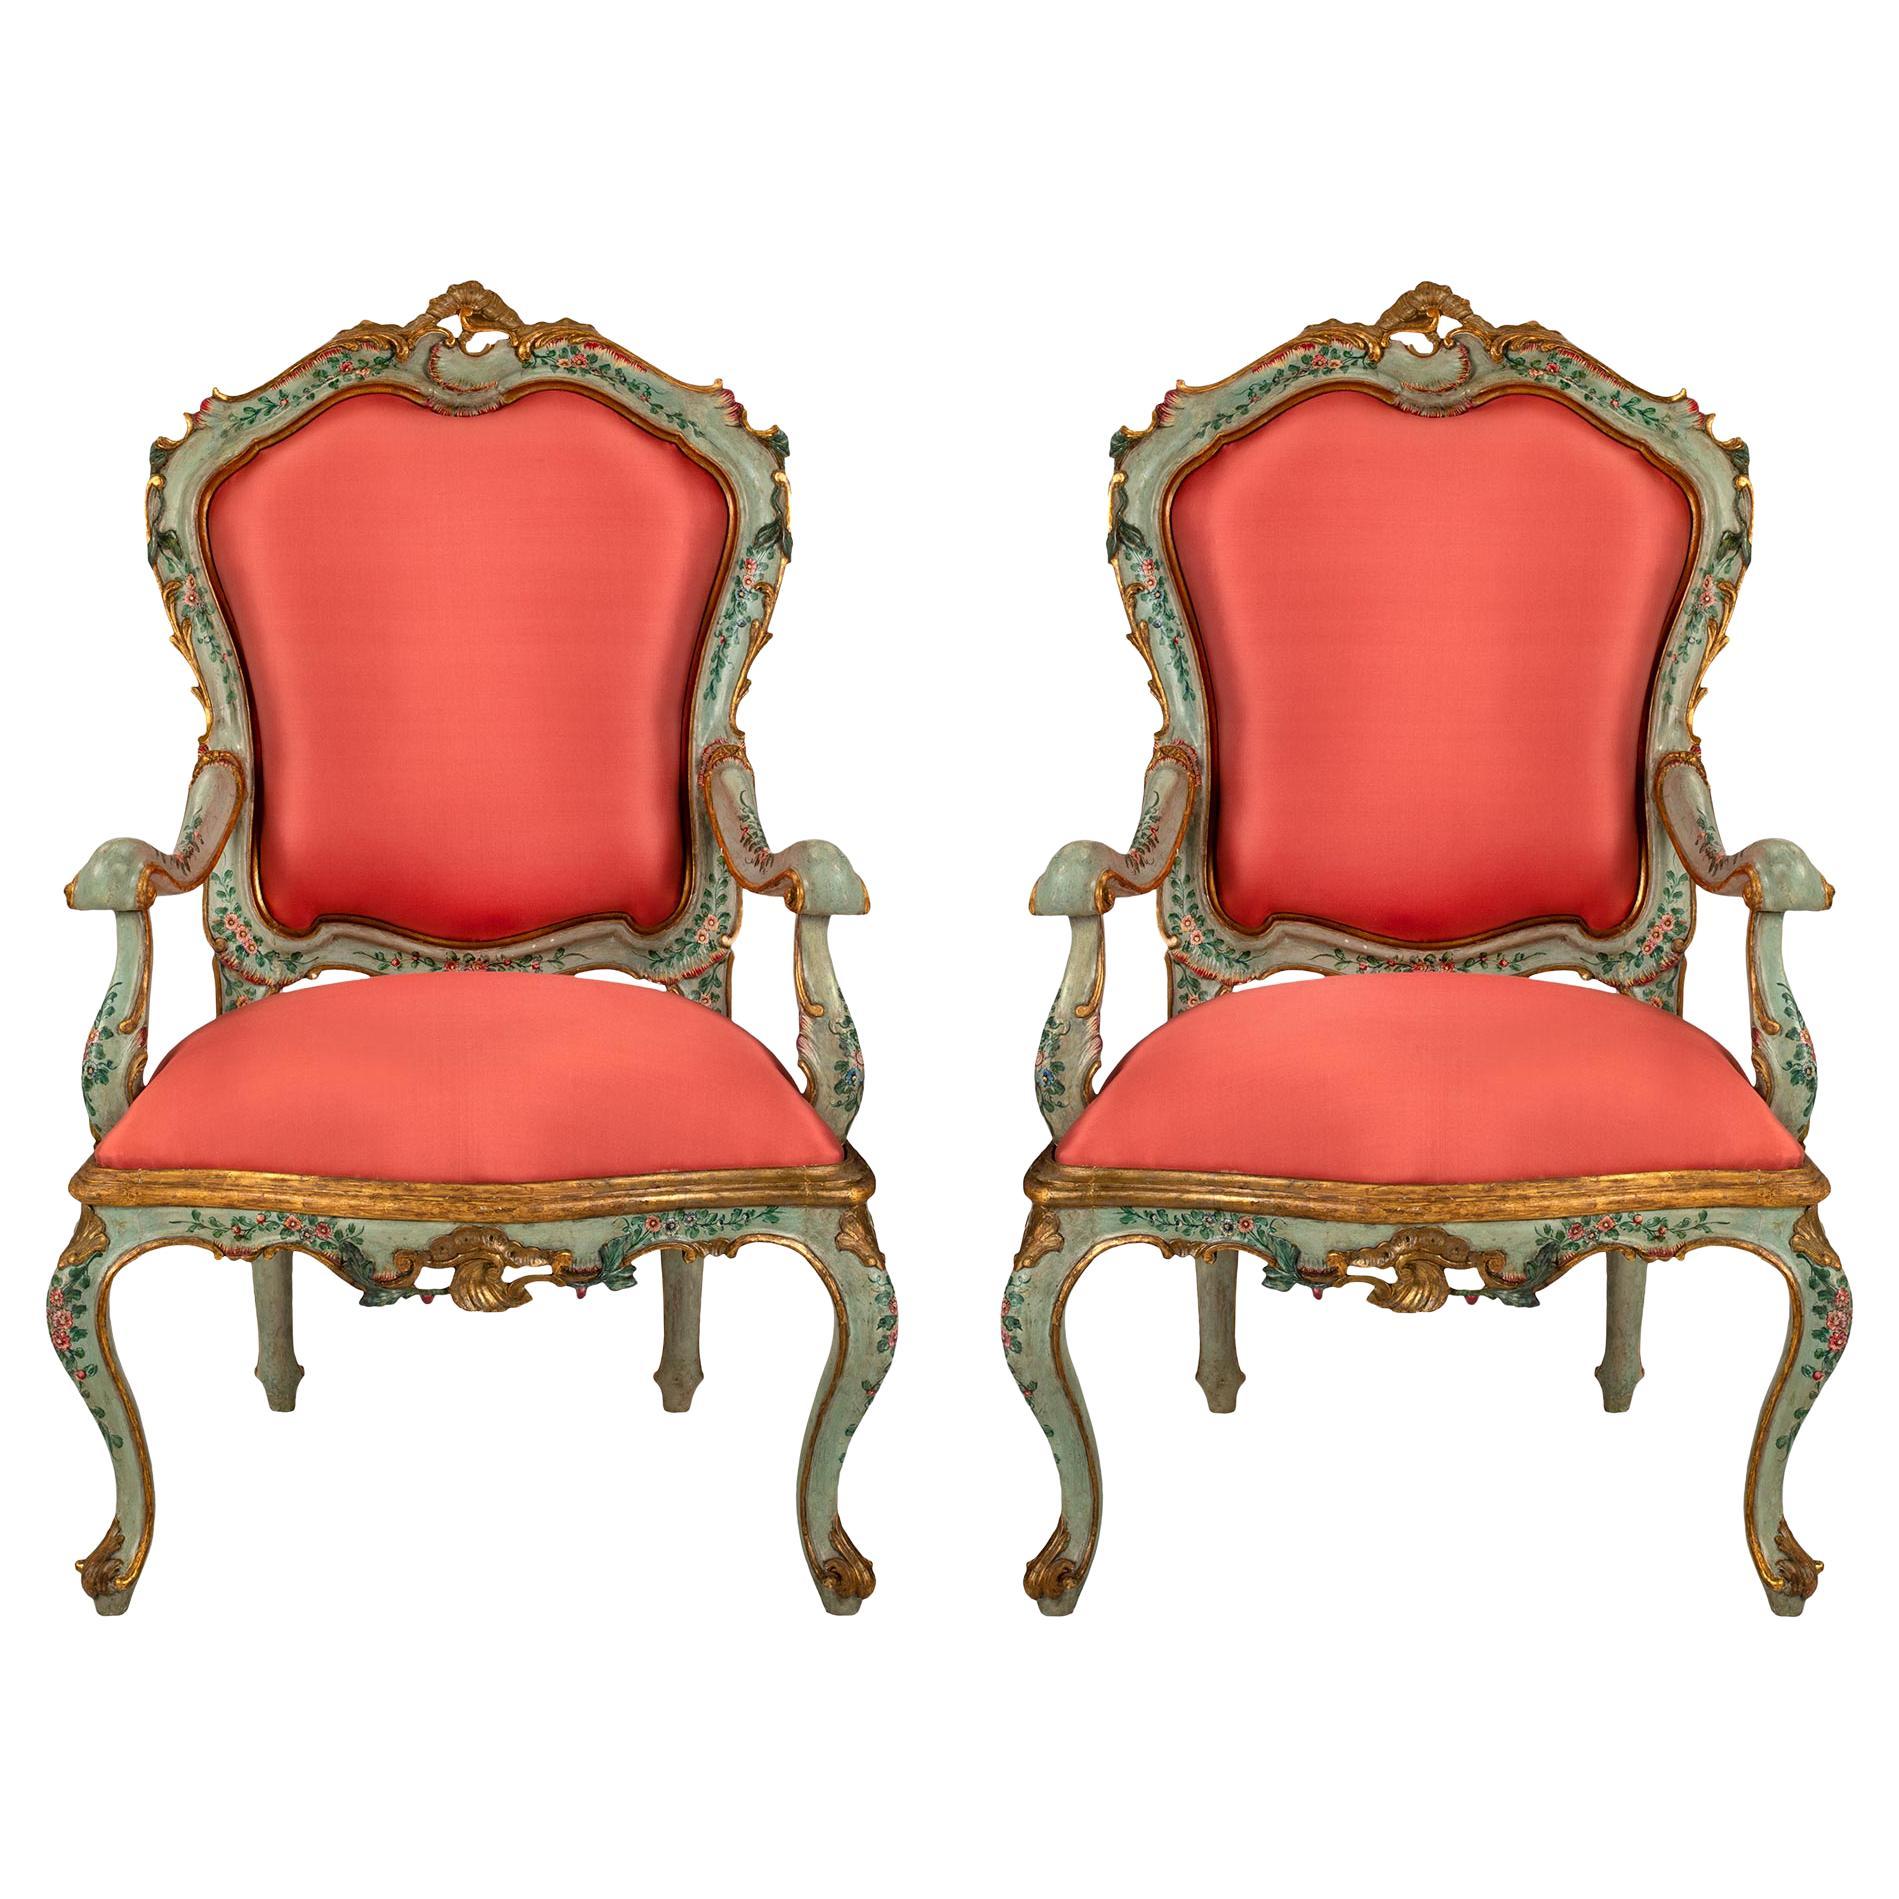 Pair of Italian 18th Century Venetian Patinated and Mecca Armchairs For Sale